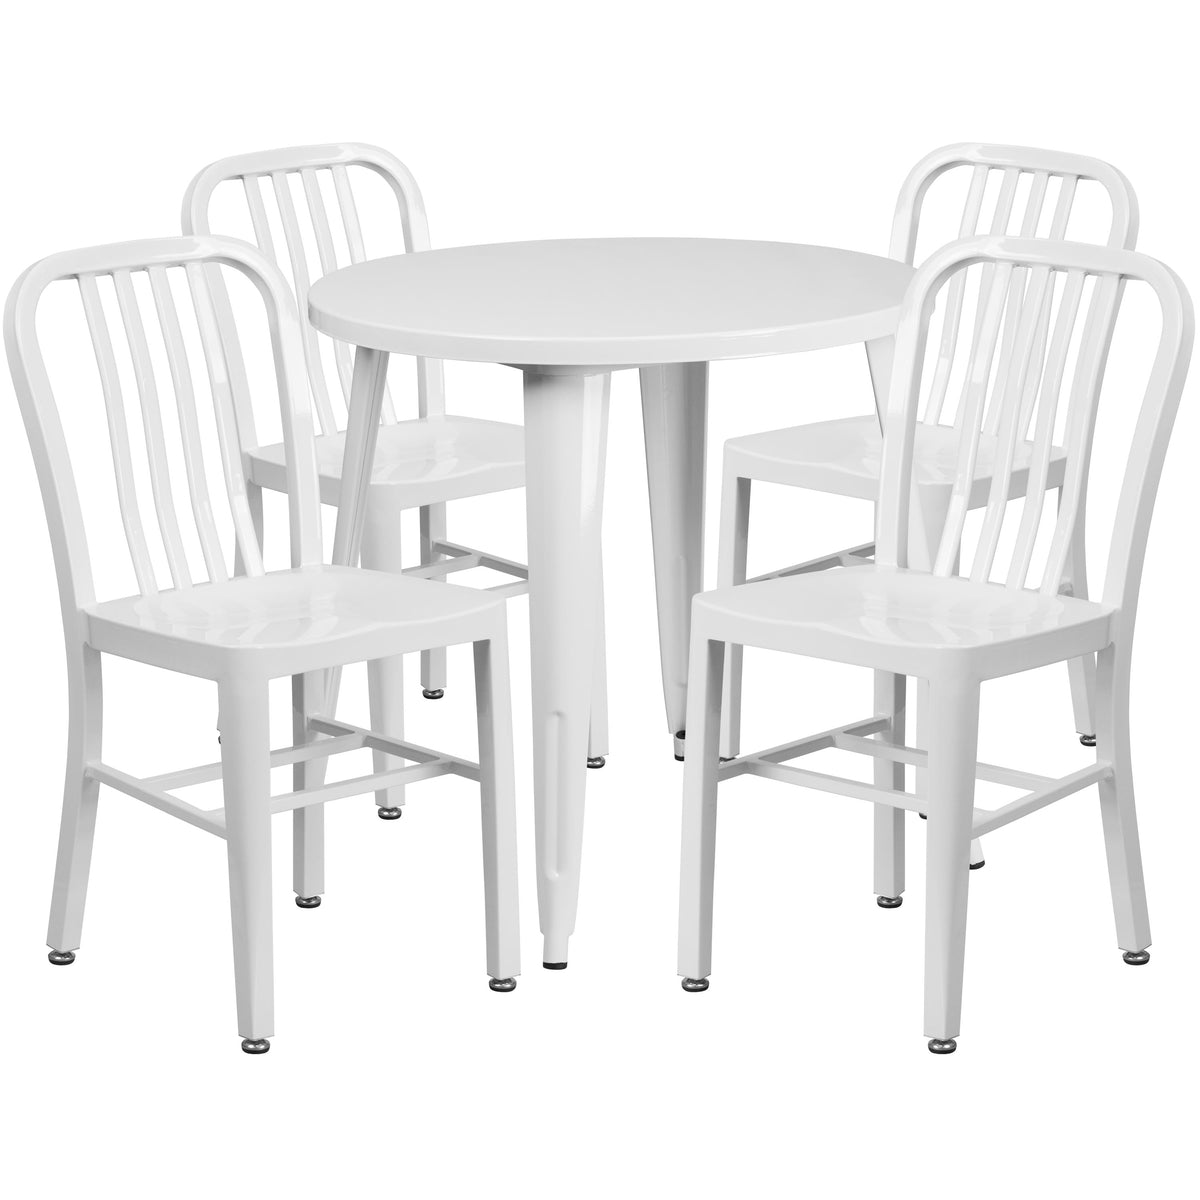 White |#| 30inch Round White Metal Indoor-Outdoor Table Set with 4 Vertical Slat Back Chairs